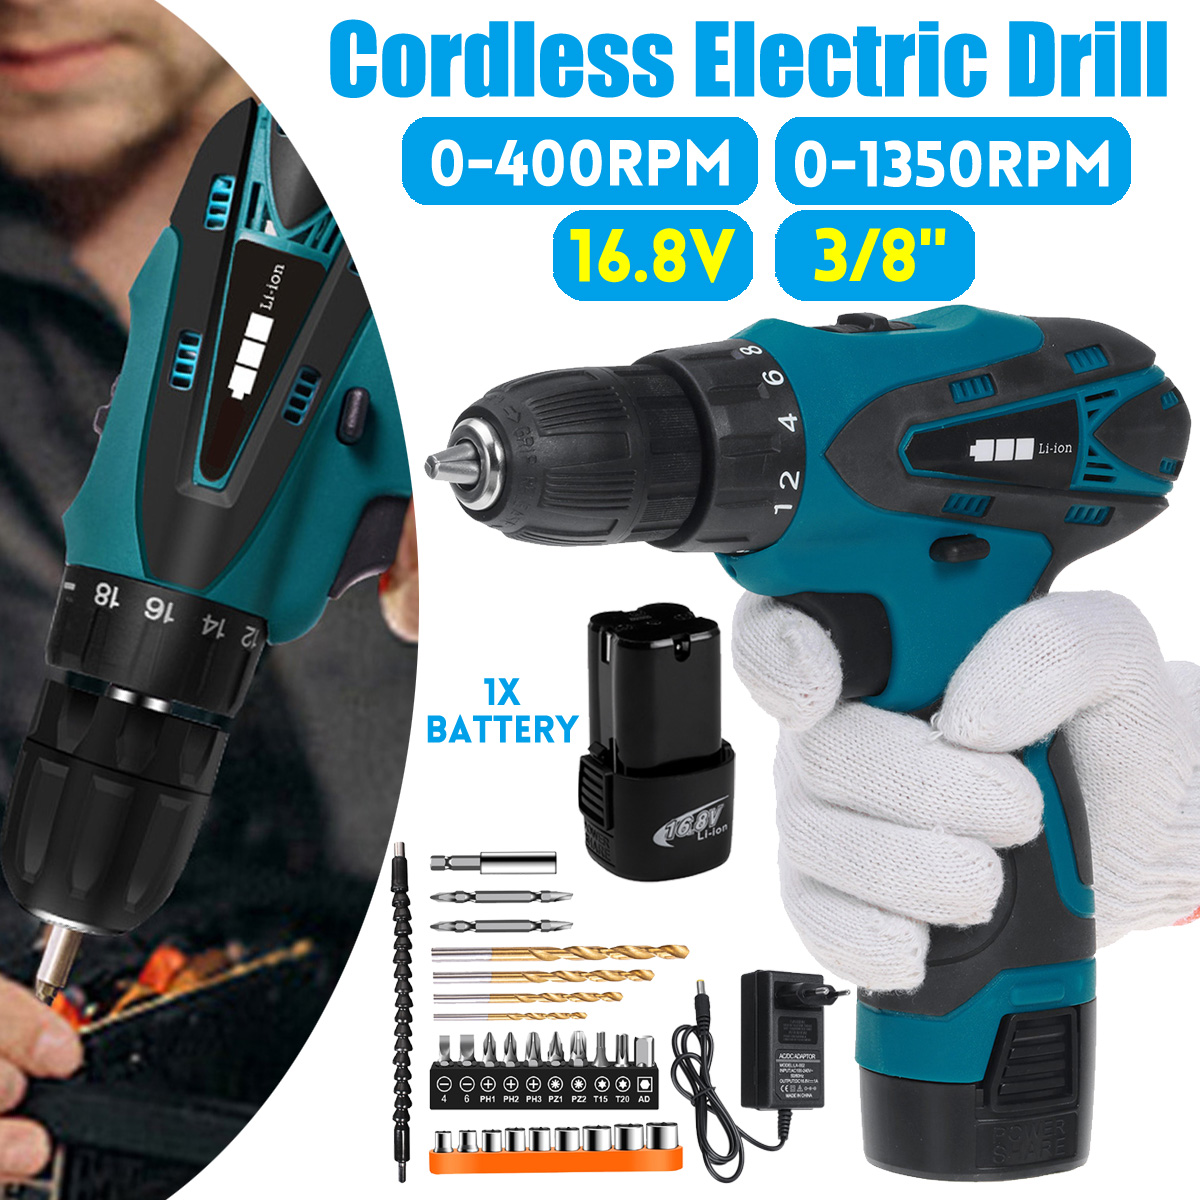 168V-Cordless-Electric-Drill-Driver-231-Torque-Multifuntional-Screwdriver-Power-Tool-W-Battery--Dril-1863336-2